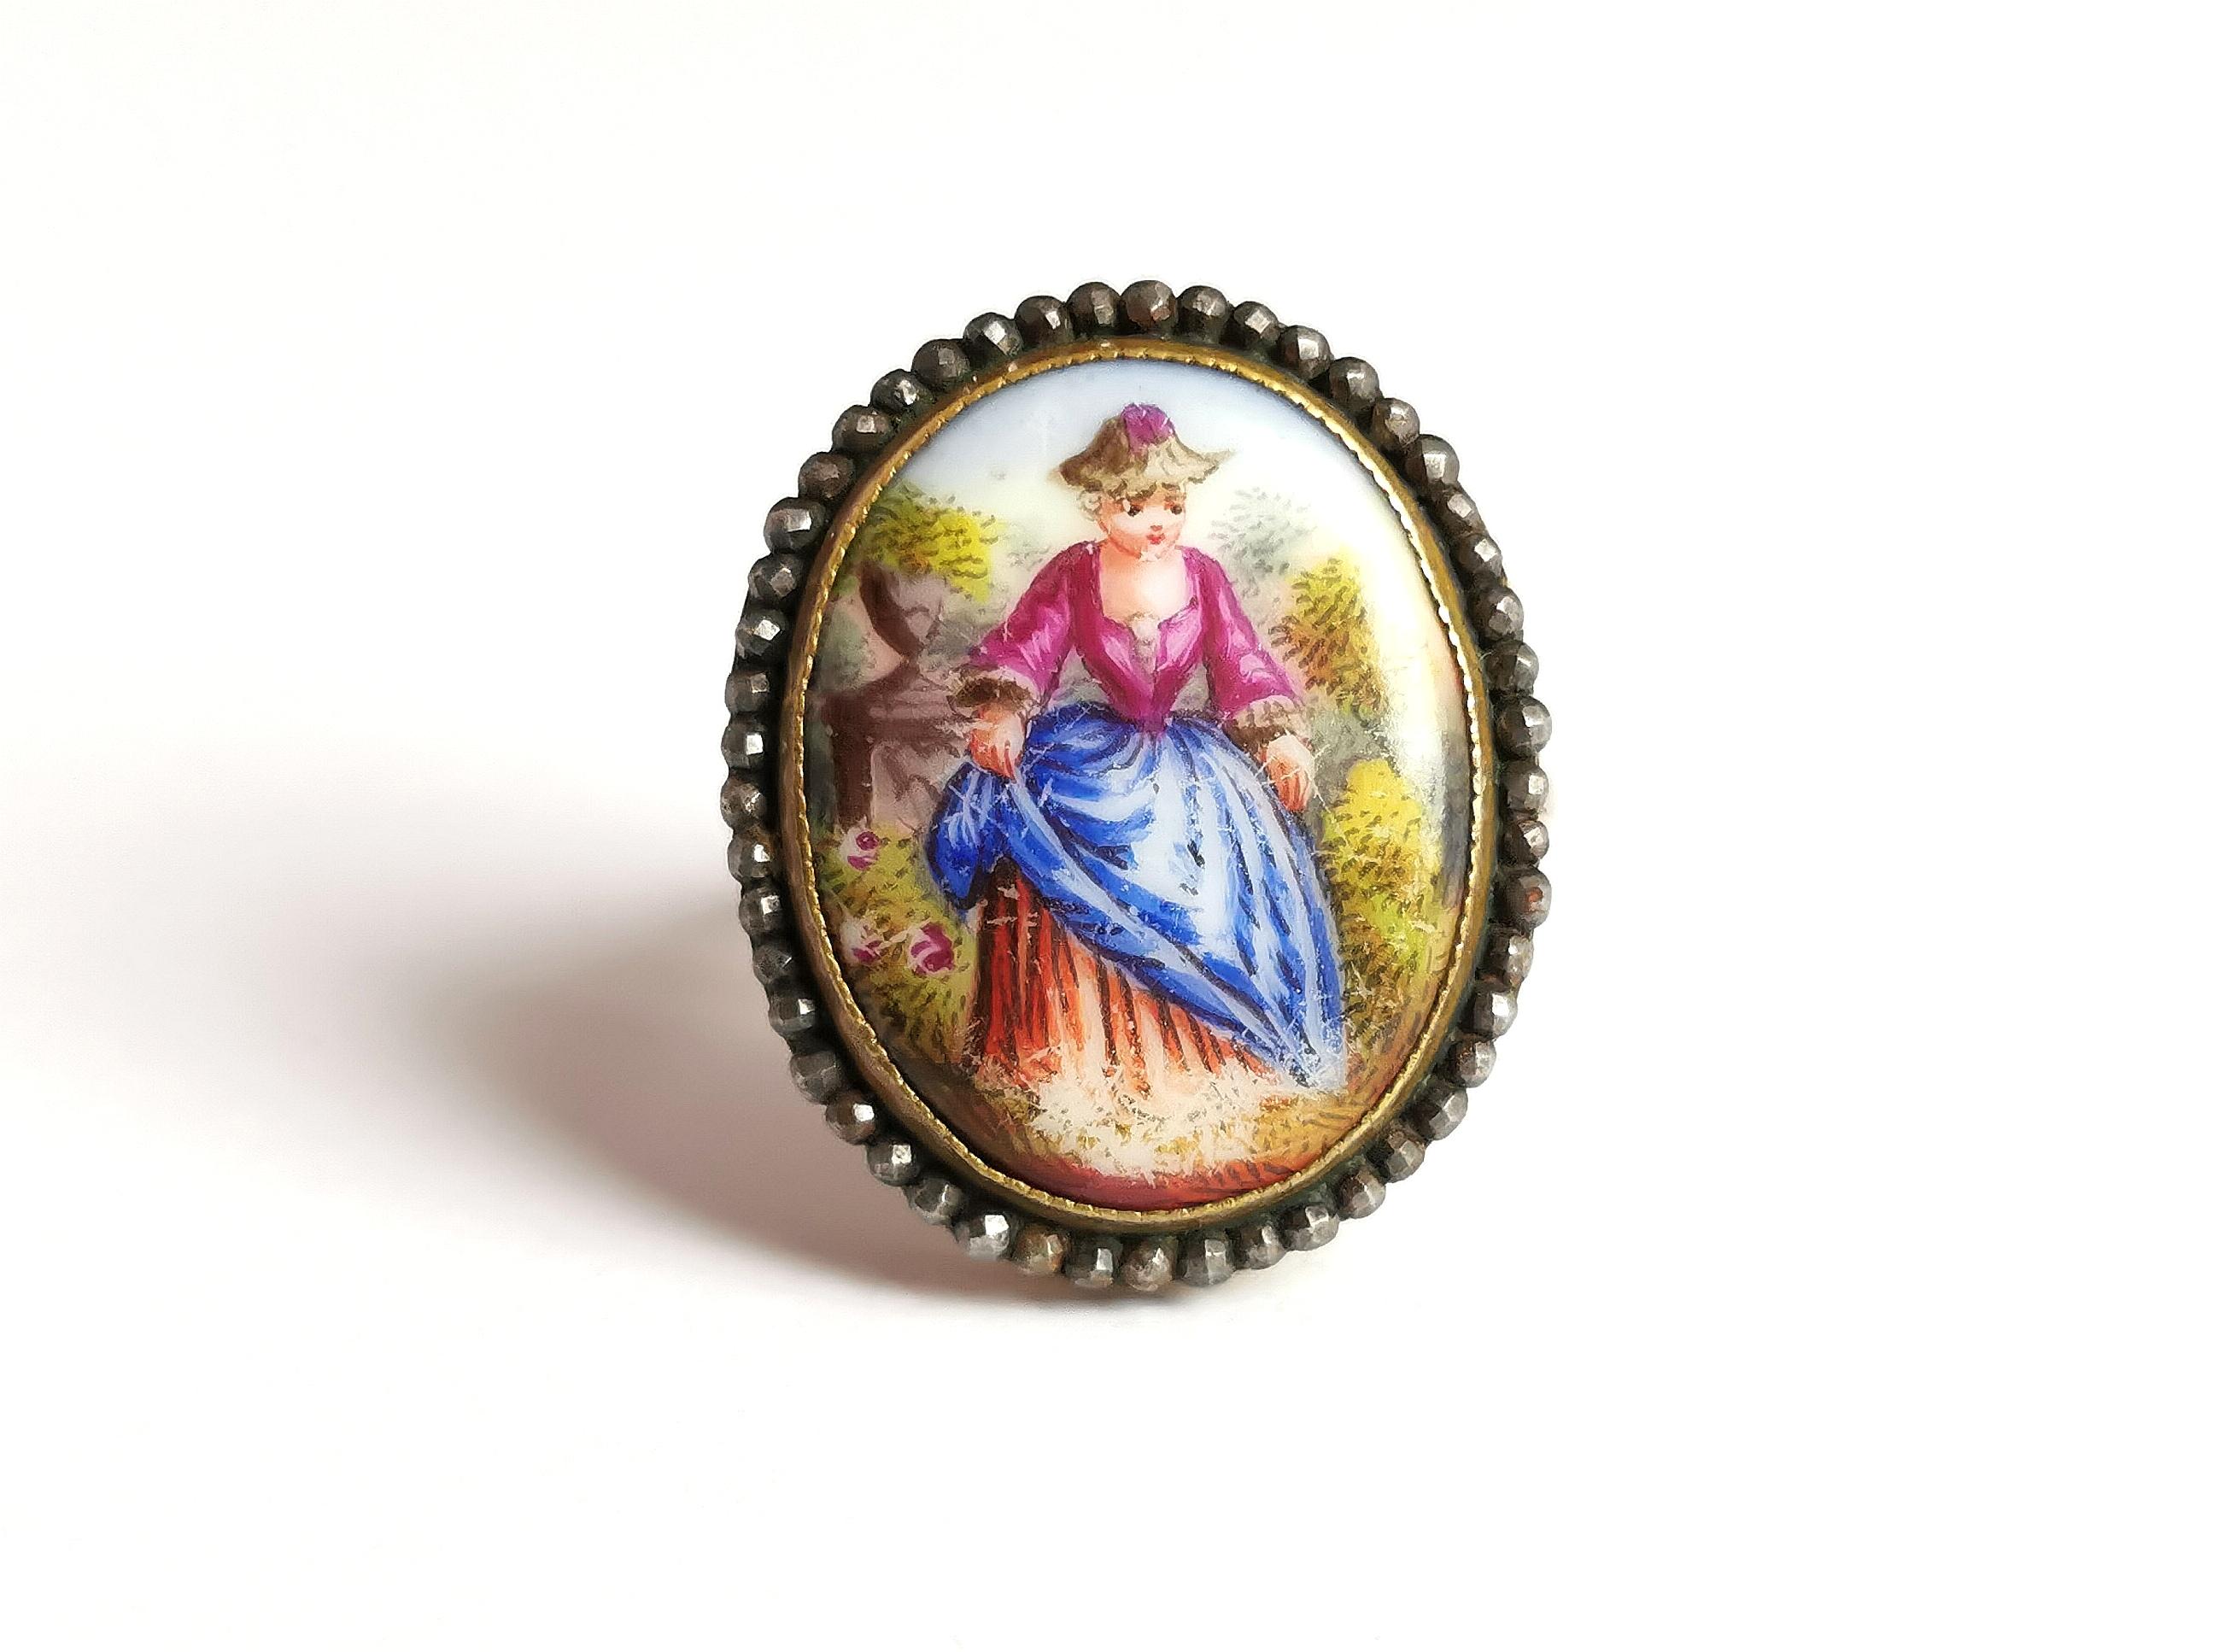 Antique Enamelled Portrait Ring, 9k Gold, Cut Steel and Mother of Pearl 9